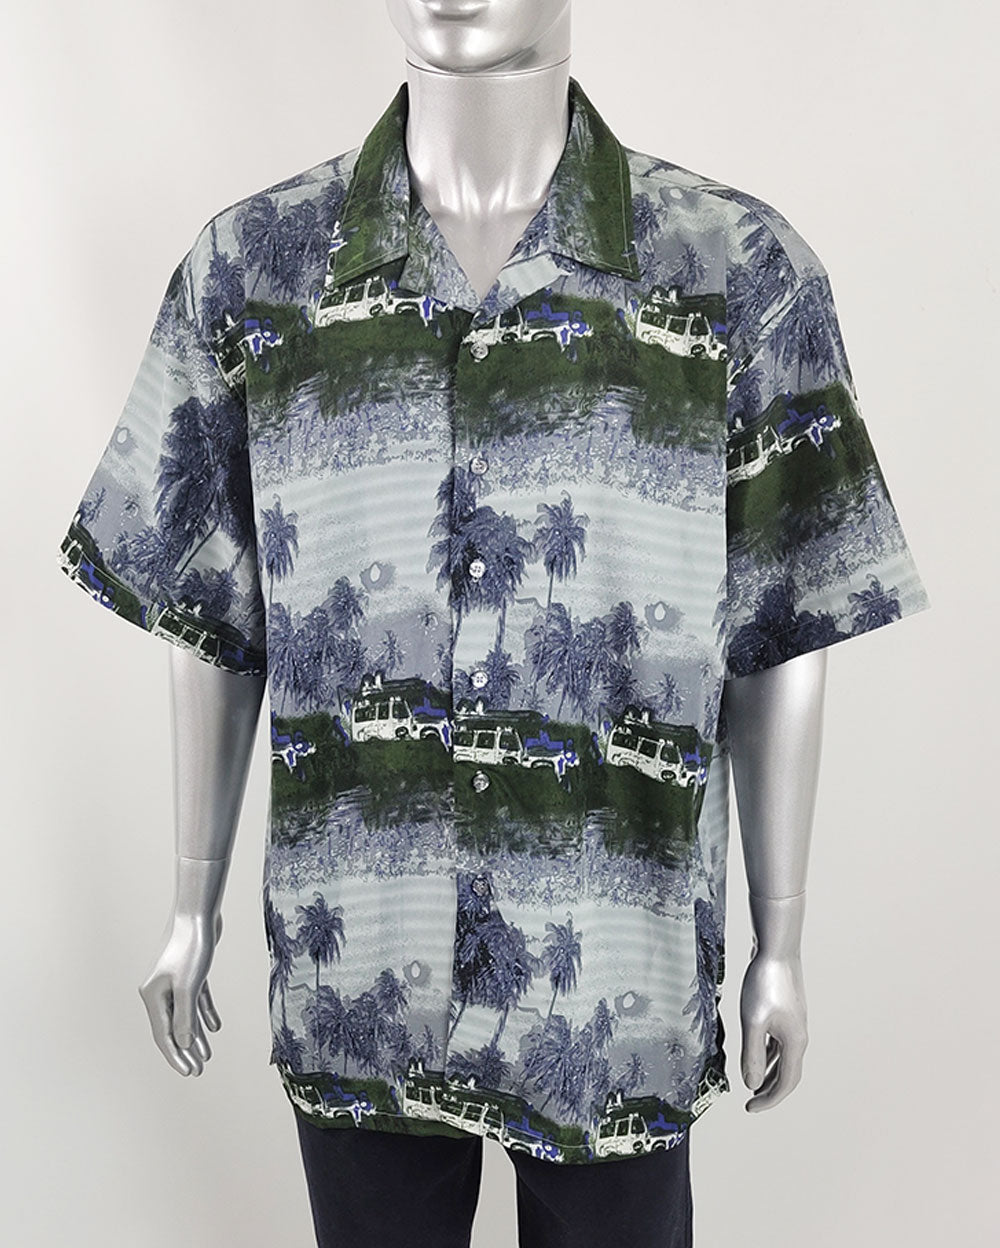 Vintage South Pole 2000s Shirt featuring a blue, purple and green hawaiian print with jeeps.